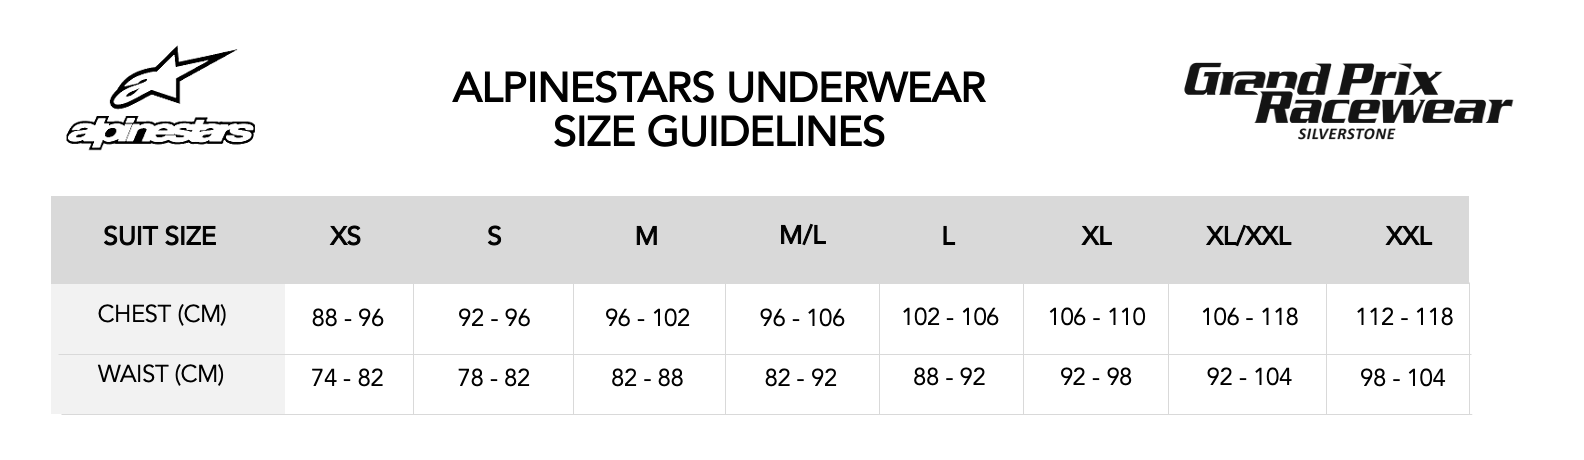 Size Guide for Alpinestars Race Underwear available from www.gprdirect.com